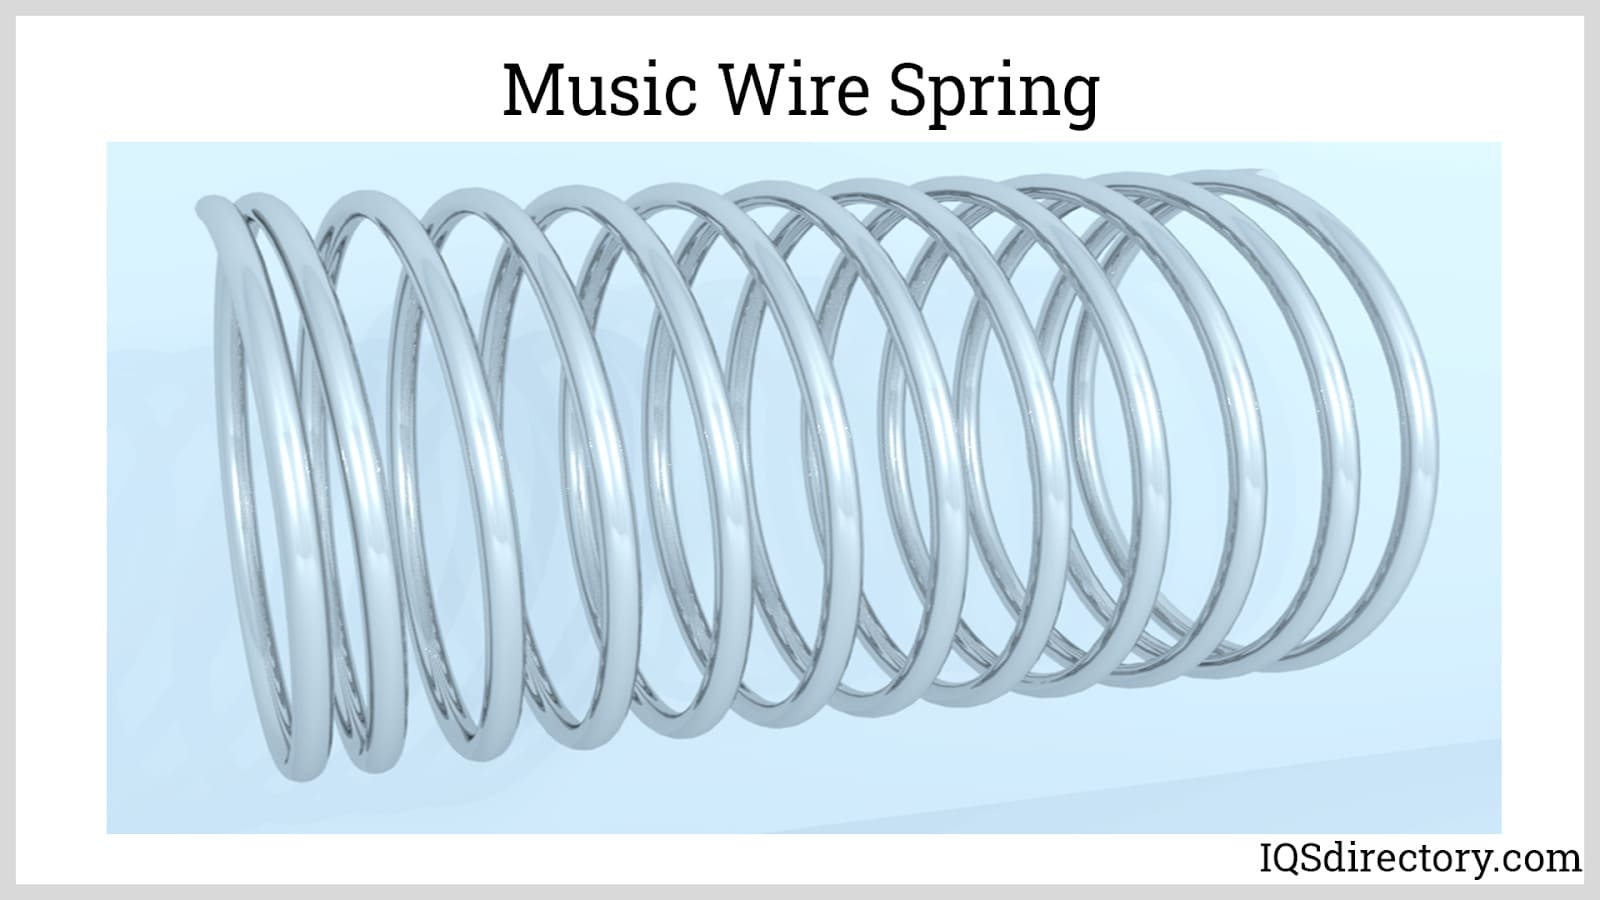 Music Wire Spring